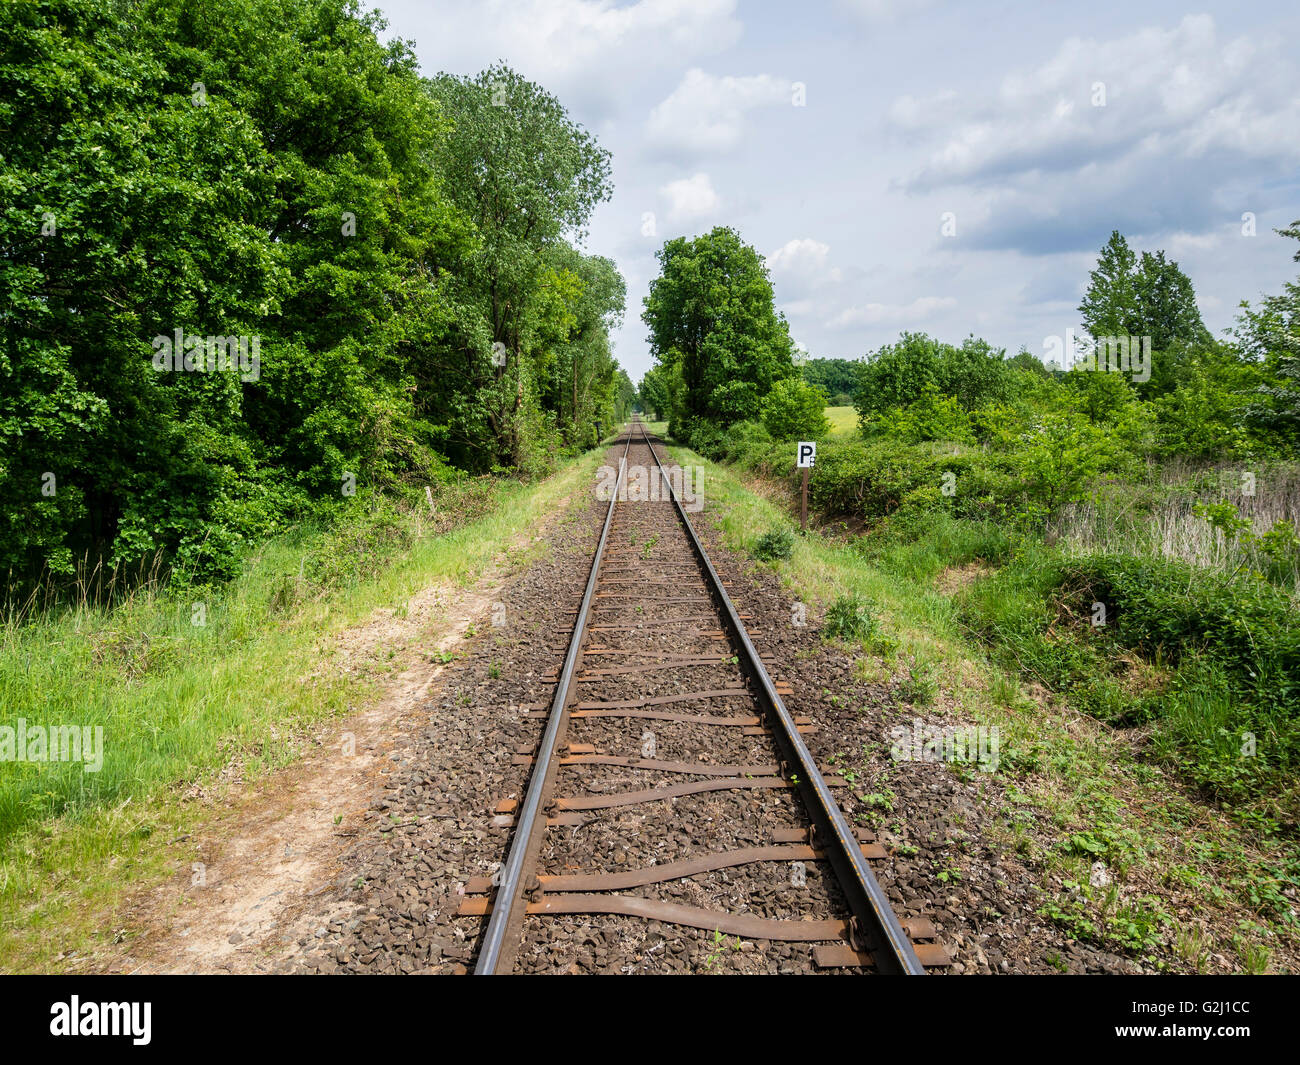 Railroad tracks of the OHE, Osthannoversche Eisenbahnen railway network, Lachtehausen, Celle, Lower Saxony, Germany, Europe Stock Photo